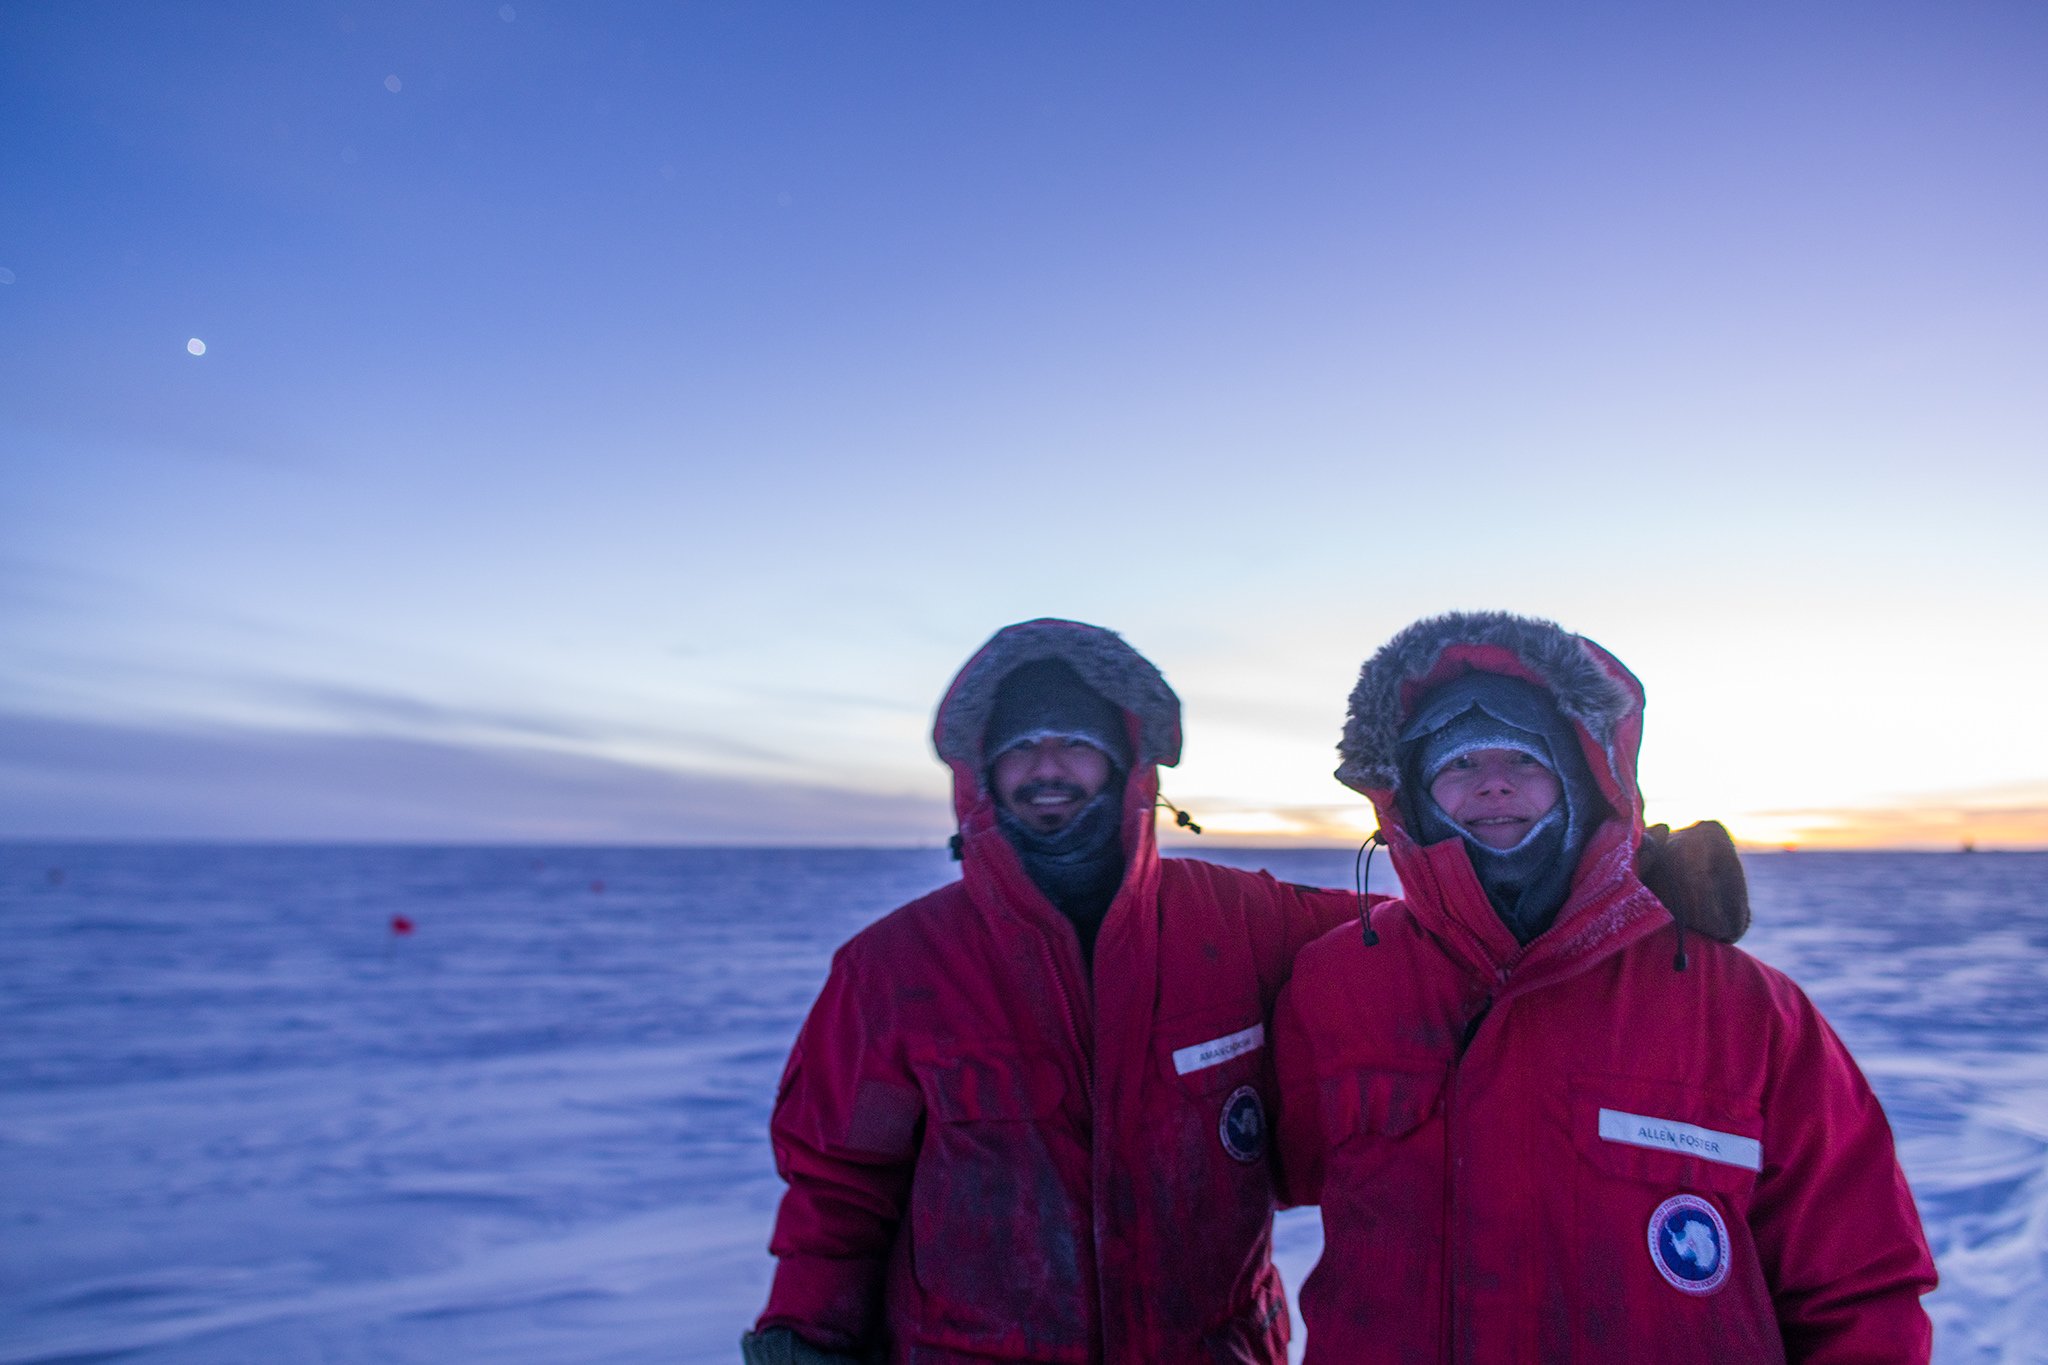 The polar expeditioners wear layers and layers of clothing to protect themselves against the cold.